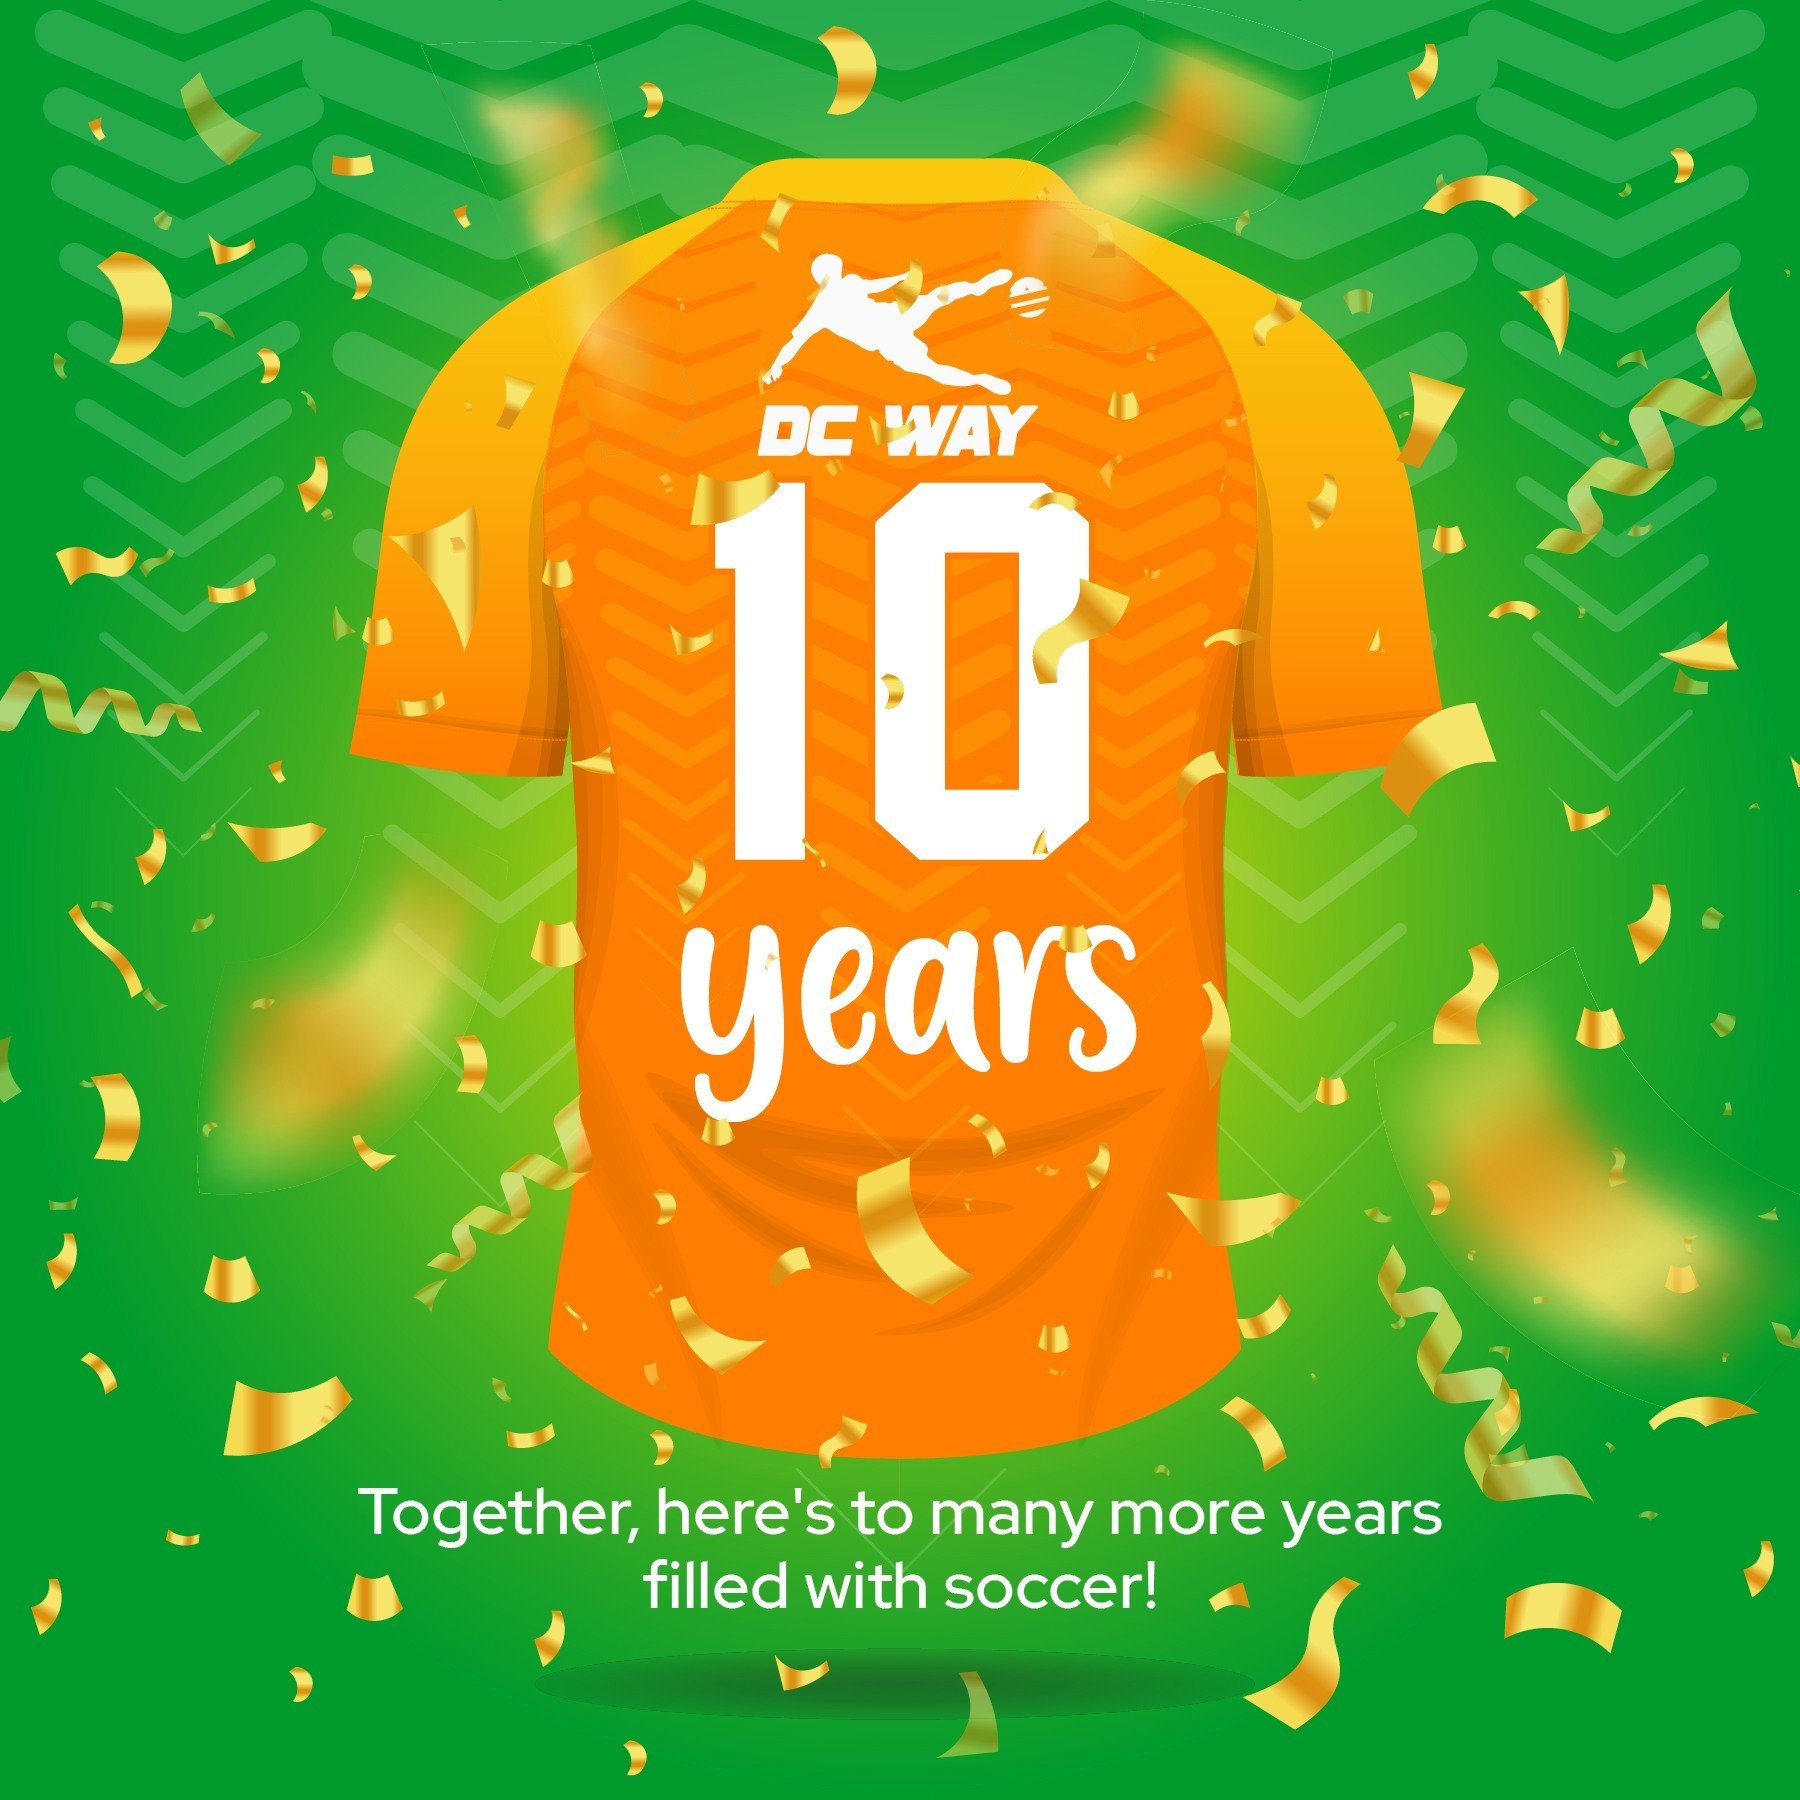 A decade ago, we embarked on a journey fueled by our love for soccer, and today, we celebrate a decade of unforgettable moments, growth, and passion. 🐼🎂

From our humble beginnings on the vibrant streets of Capitol Hill in 2013 to becoming an award